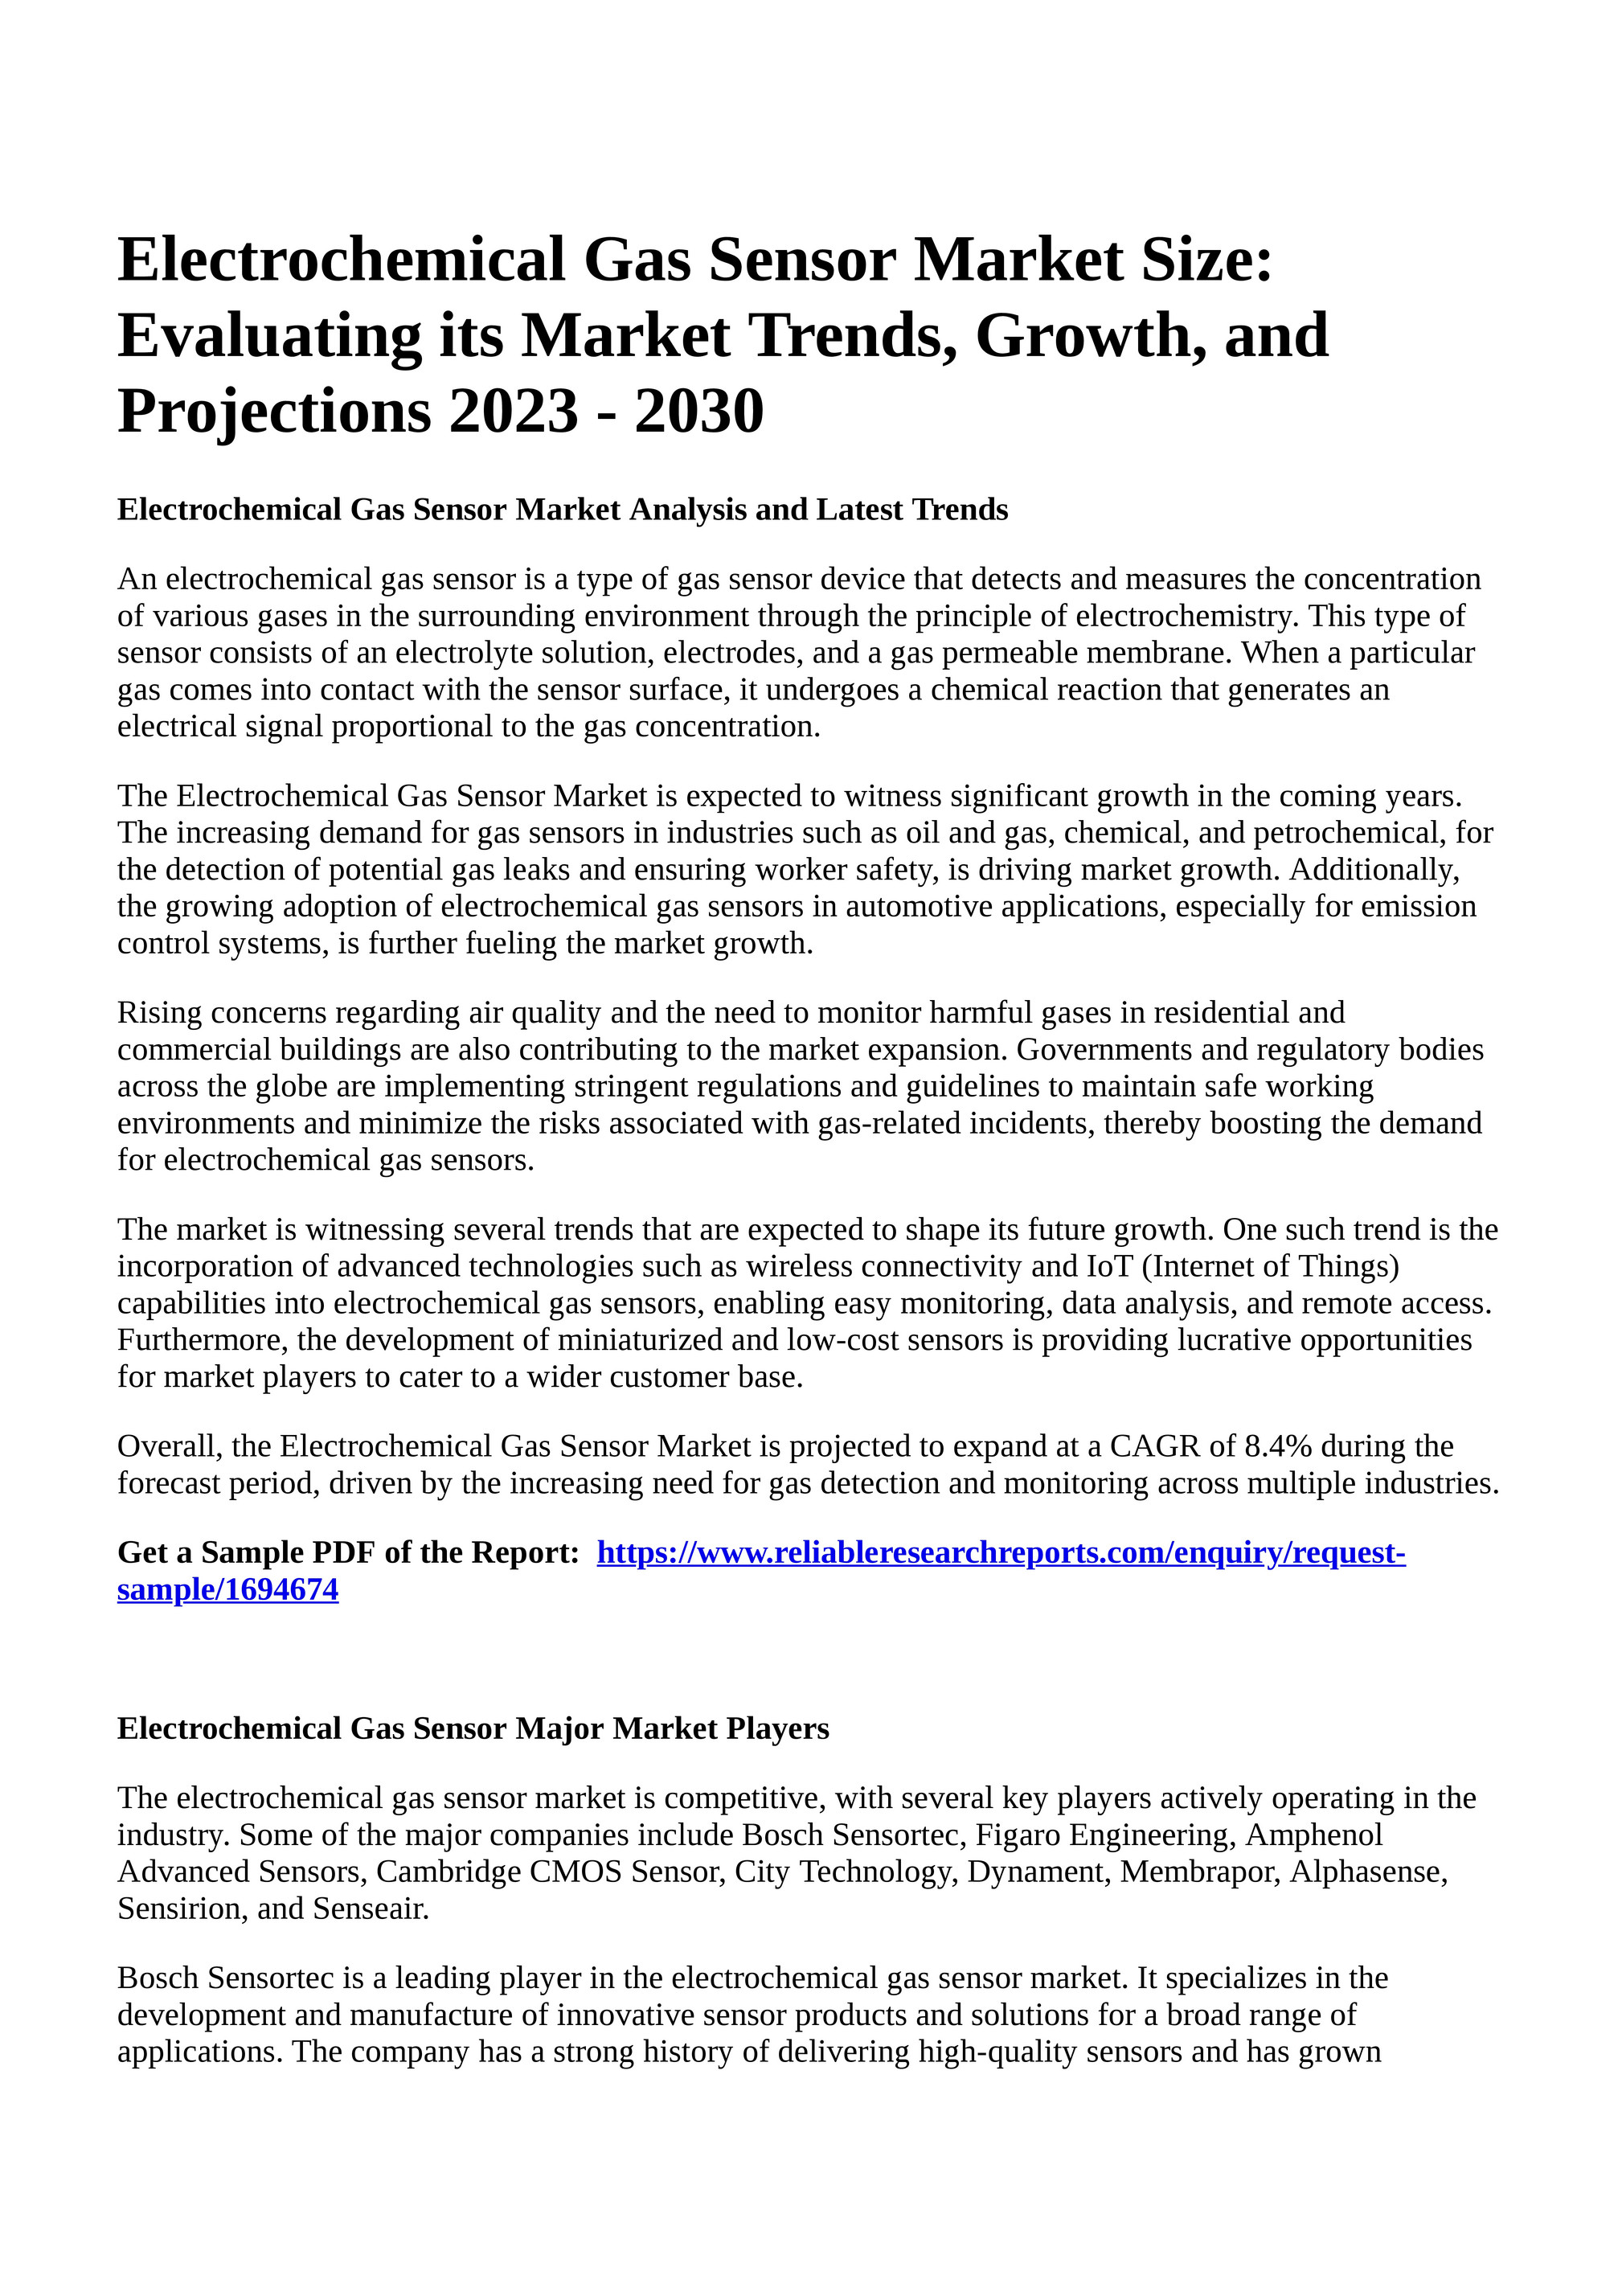 Reportprime - Electrochemical Gas Sensor Market Size: Evaluating its Market  Trends, Growth, and Projections 2023 - 2030 - Page 2-3